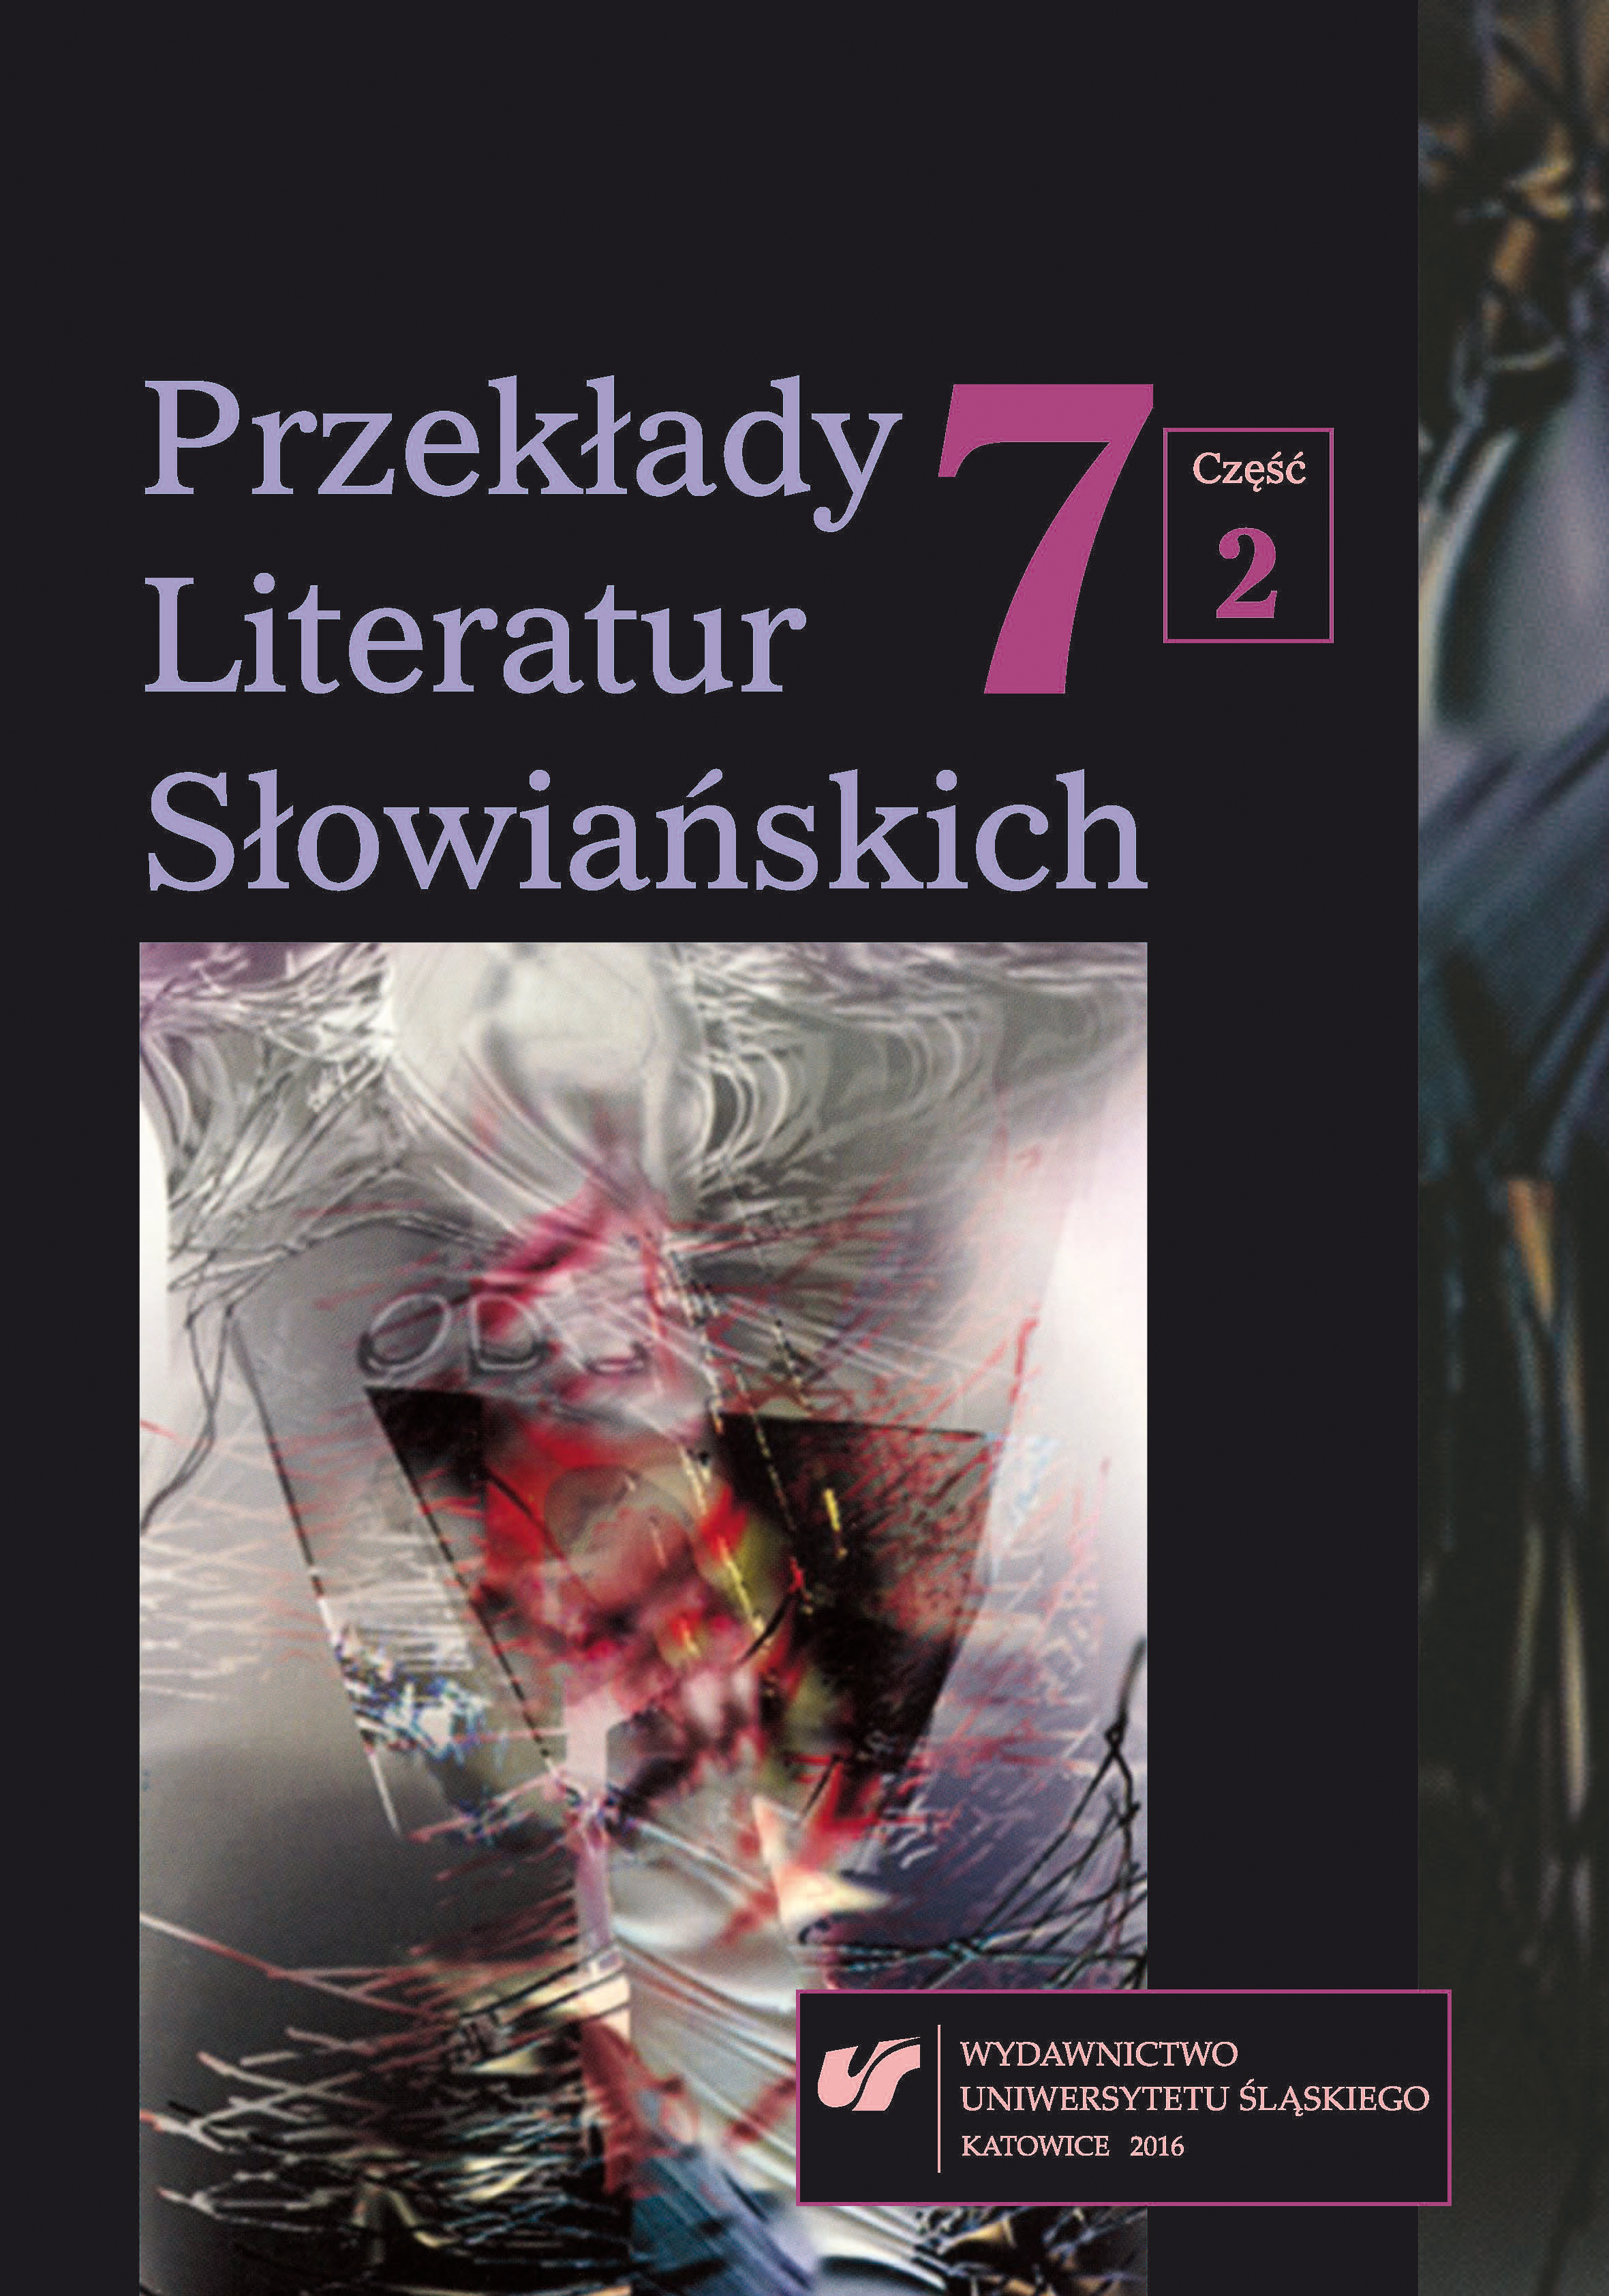 Comments on the Polish-Serbian and Serbian-Polish bibliography in 2015 Cover Image